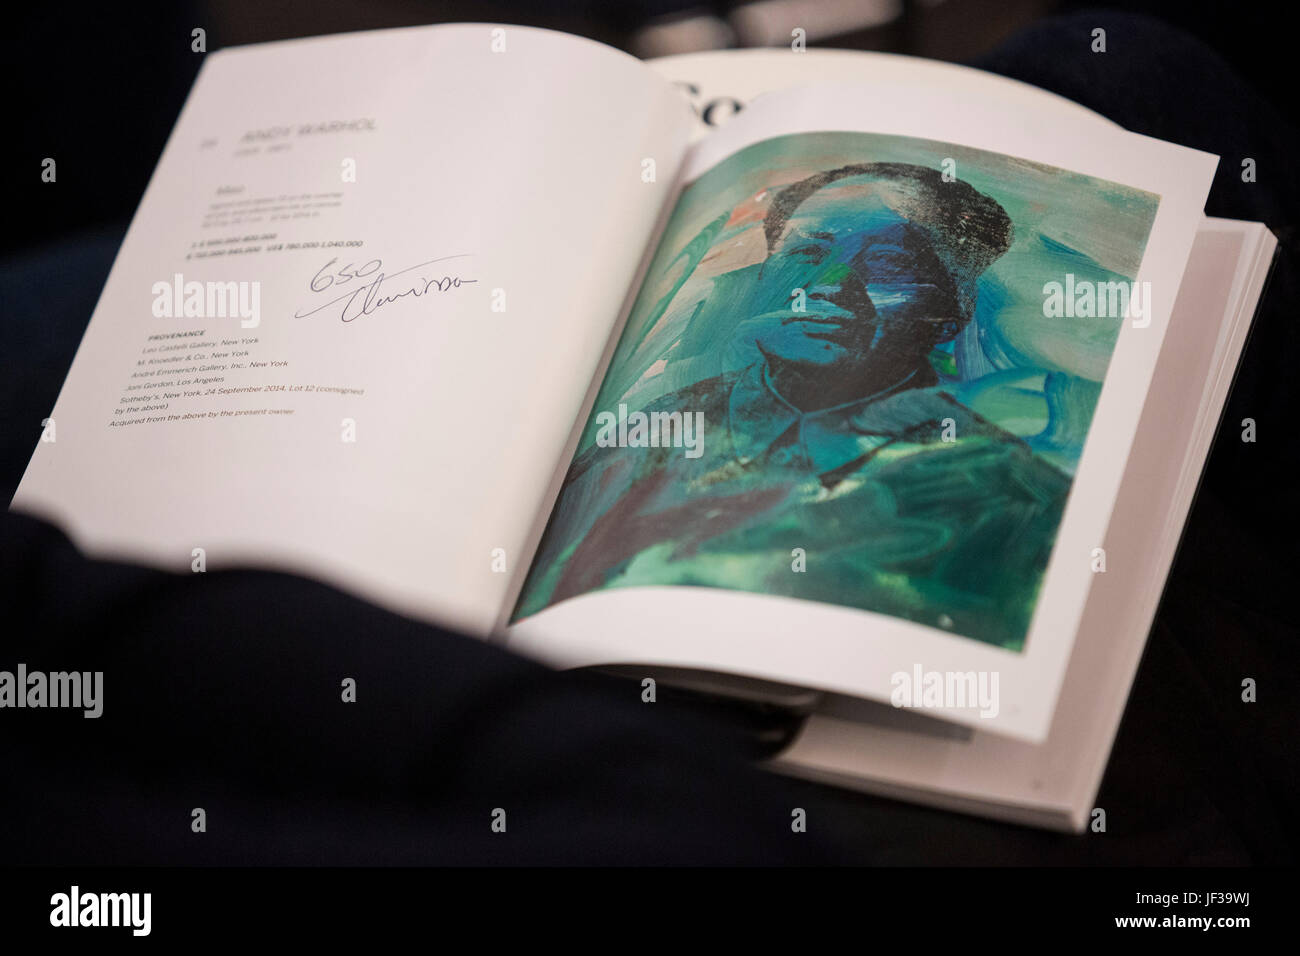 London, UK. 28 June 2017. Sotheby’s Contemporary Art Evening Auction takes place at their New Bond Street premises. View of the Andy Warhol painting of Mao in the auction catalogue. Stock Photo